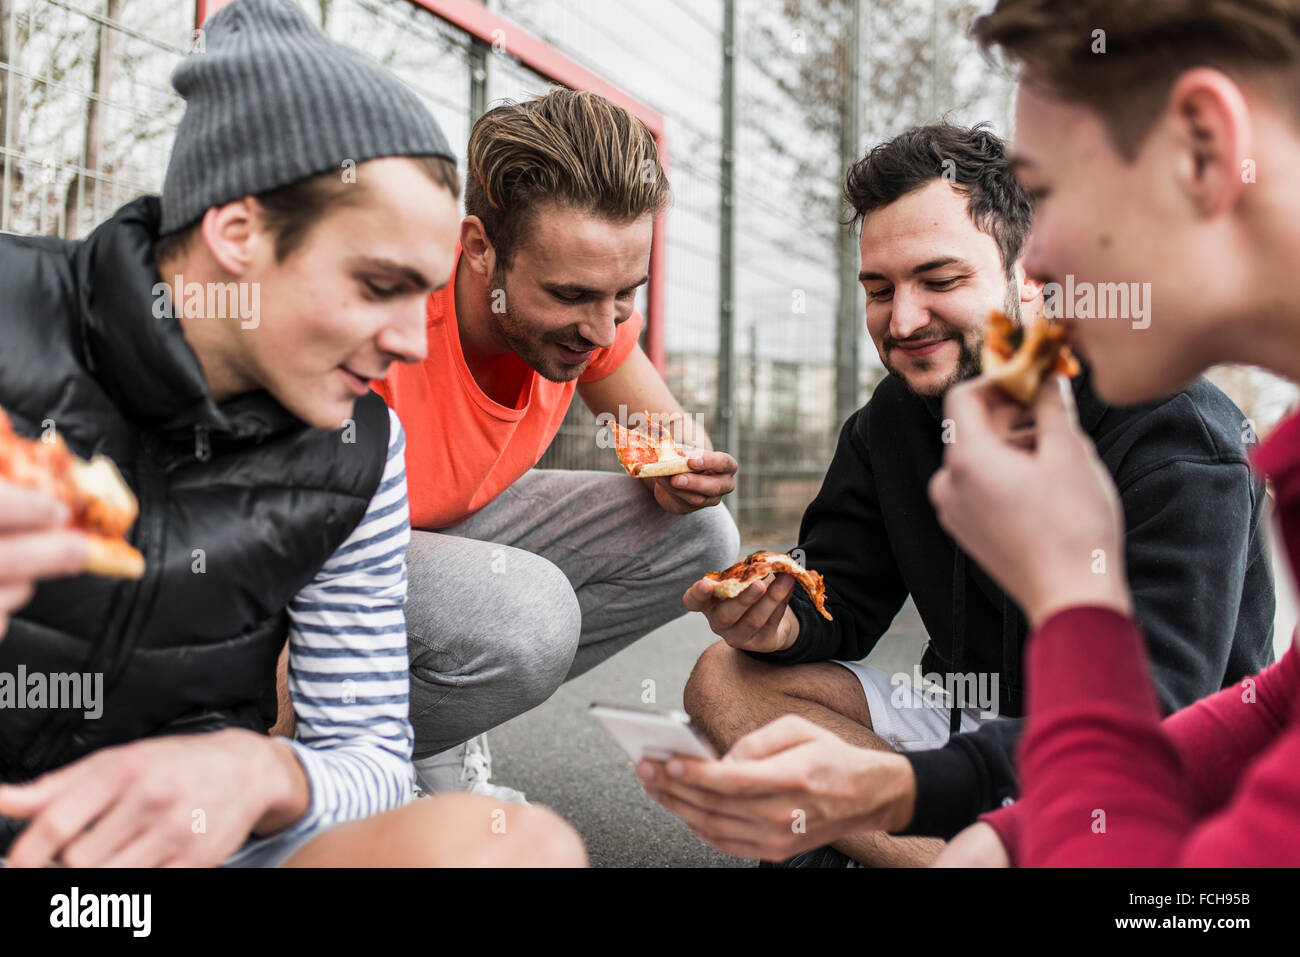 Young men eating pizza Stock Photo